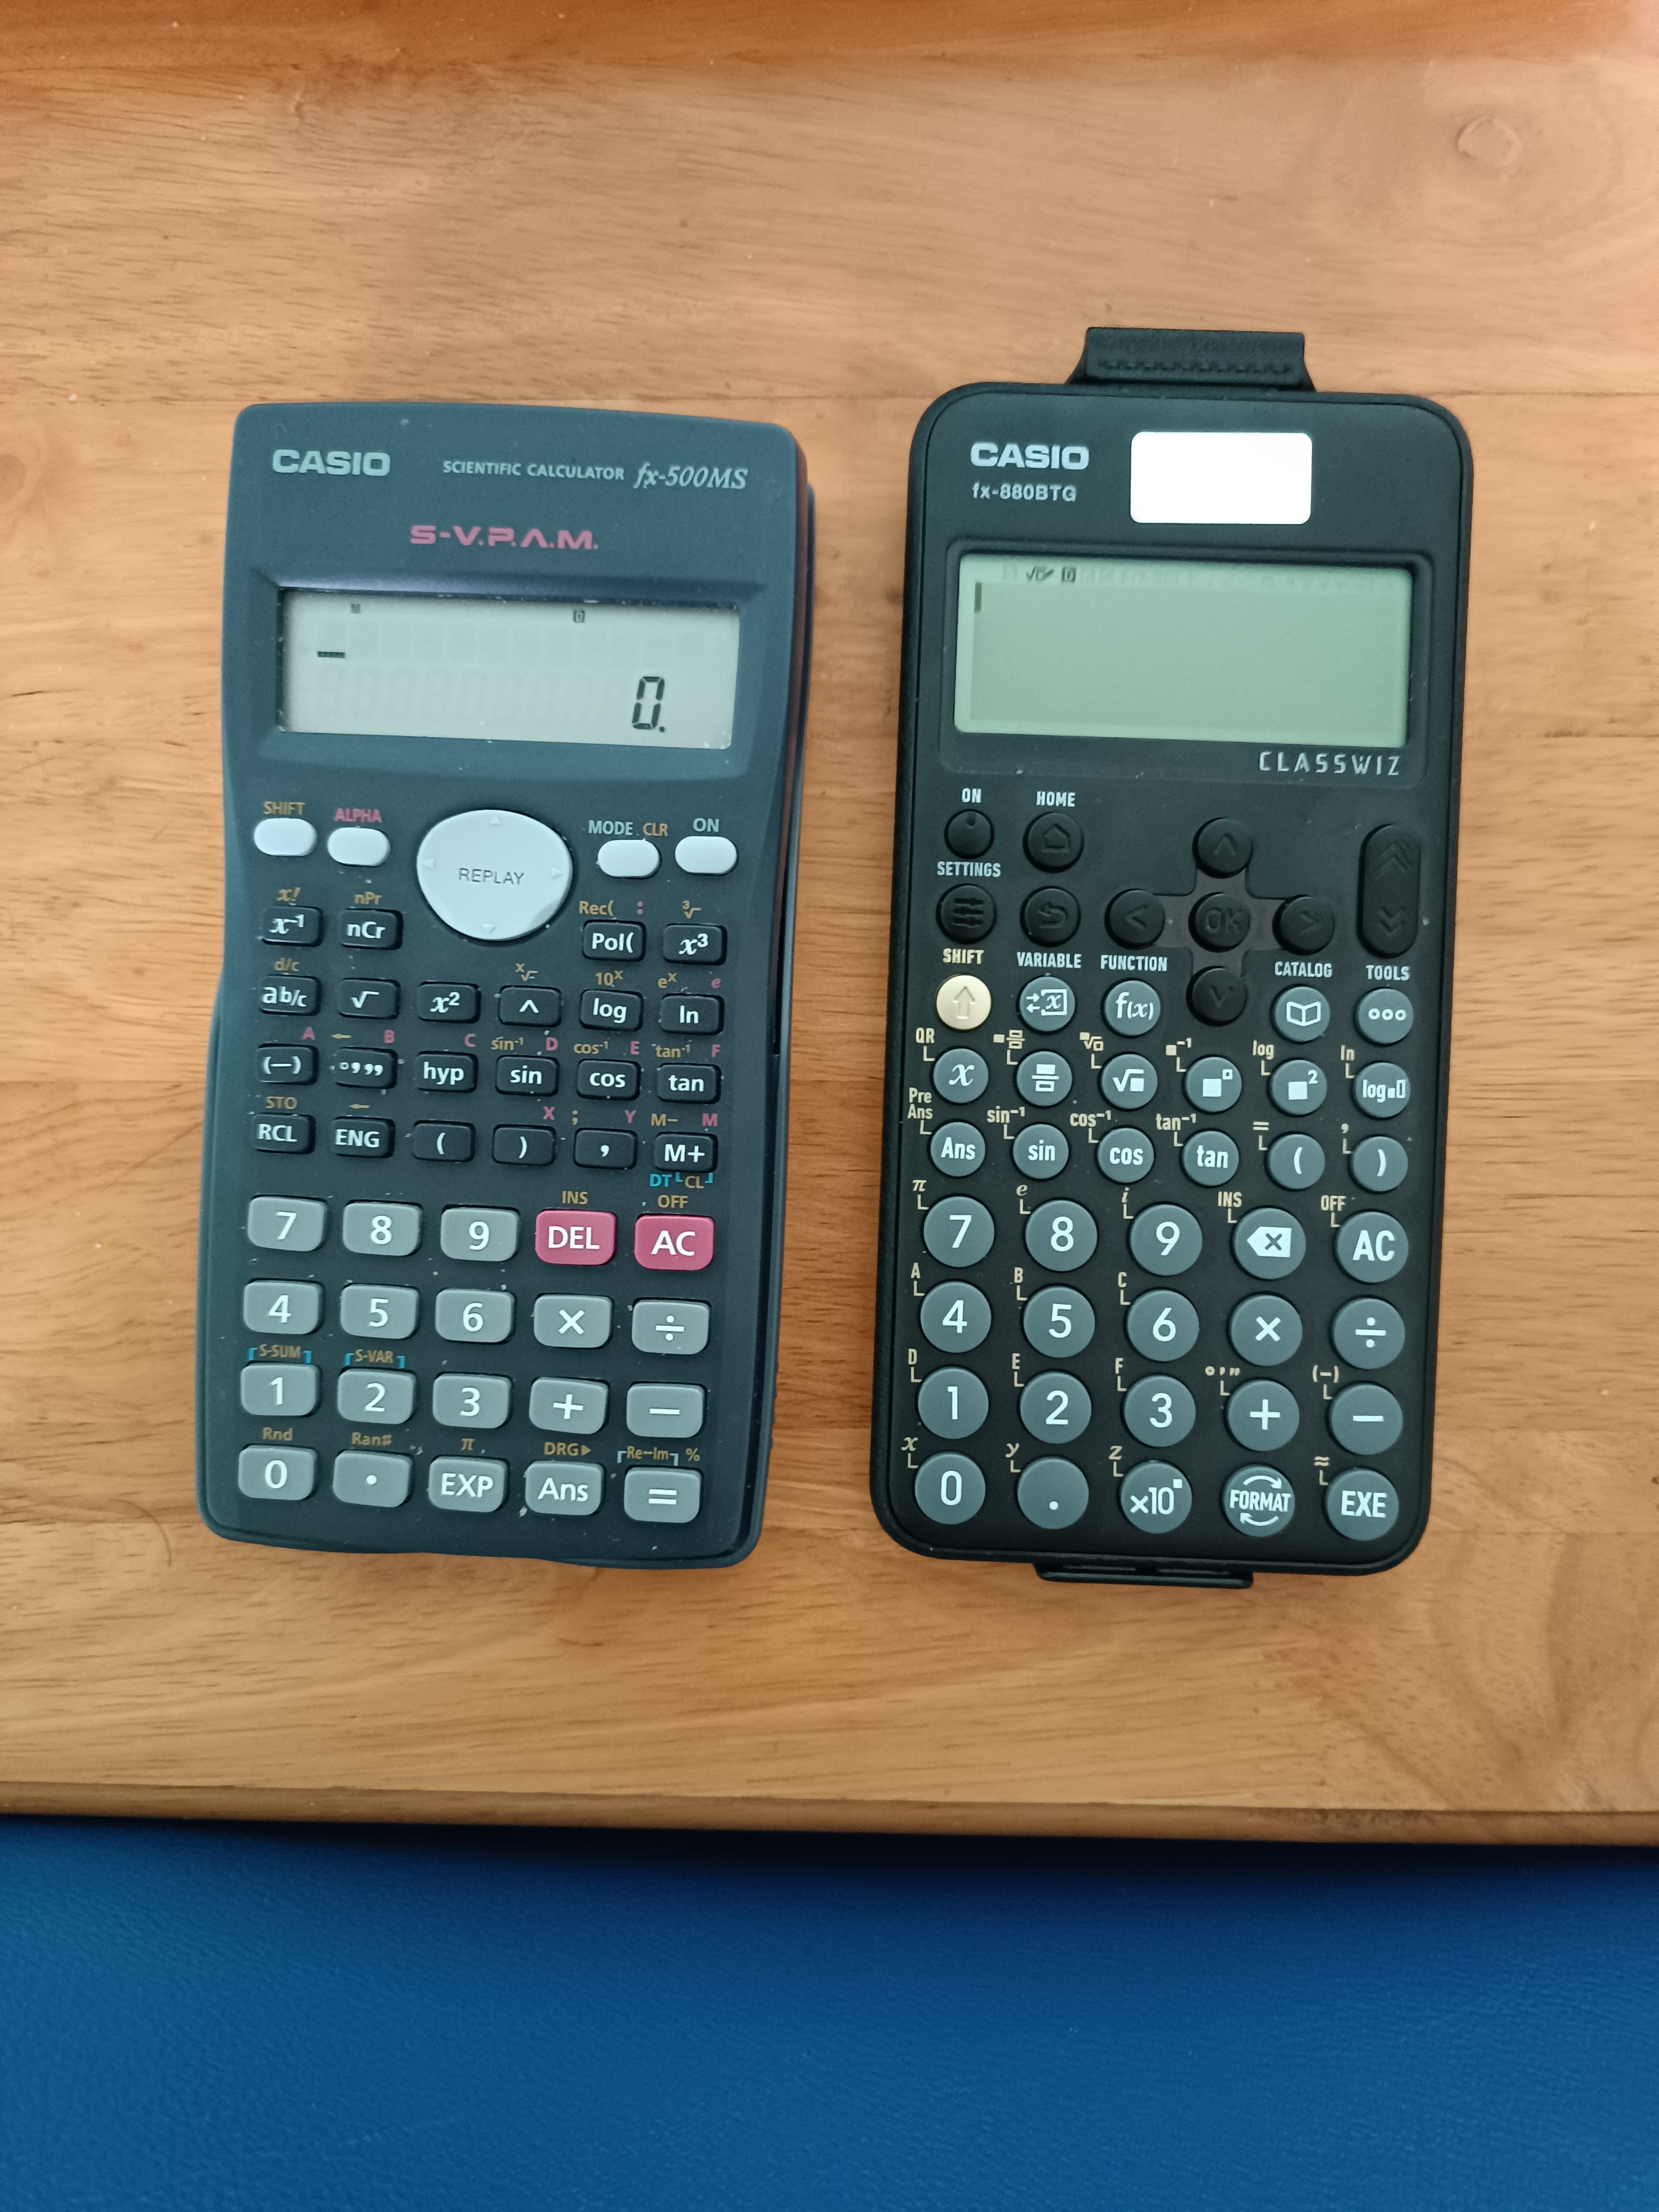 The 500MS (left) and the 880 BTG (right)